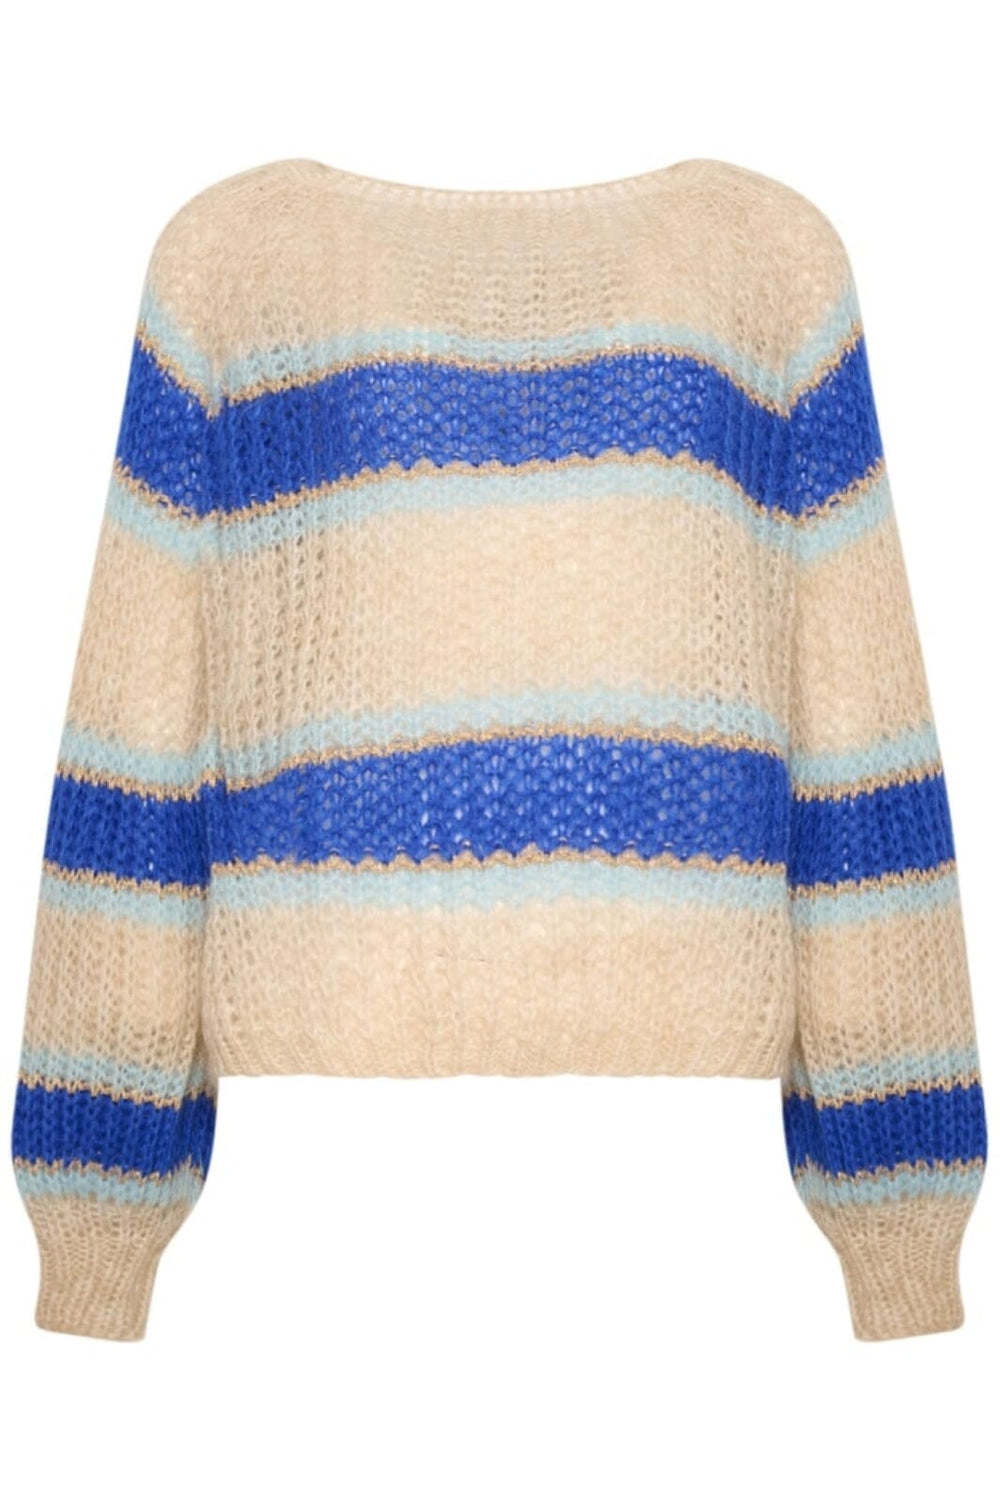 Noella - Pacific Knit Sweater - Blue Mix 